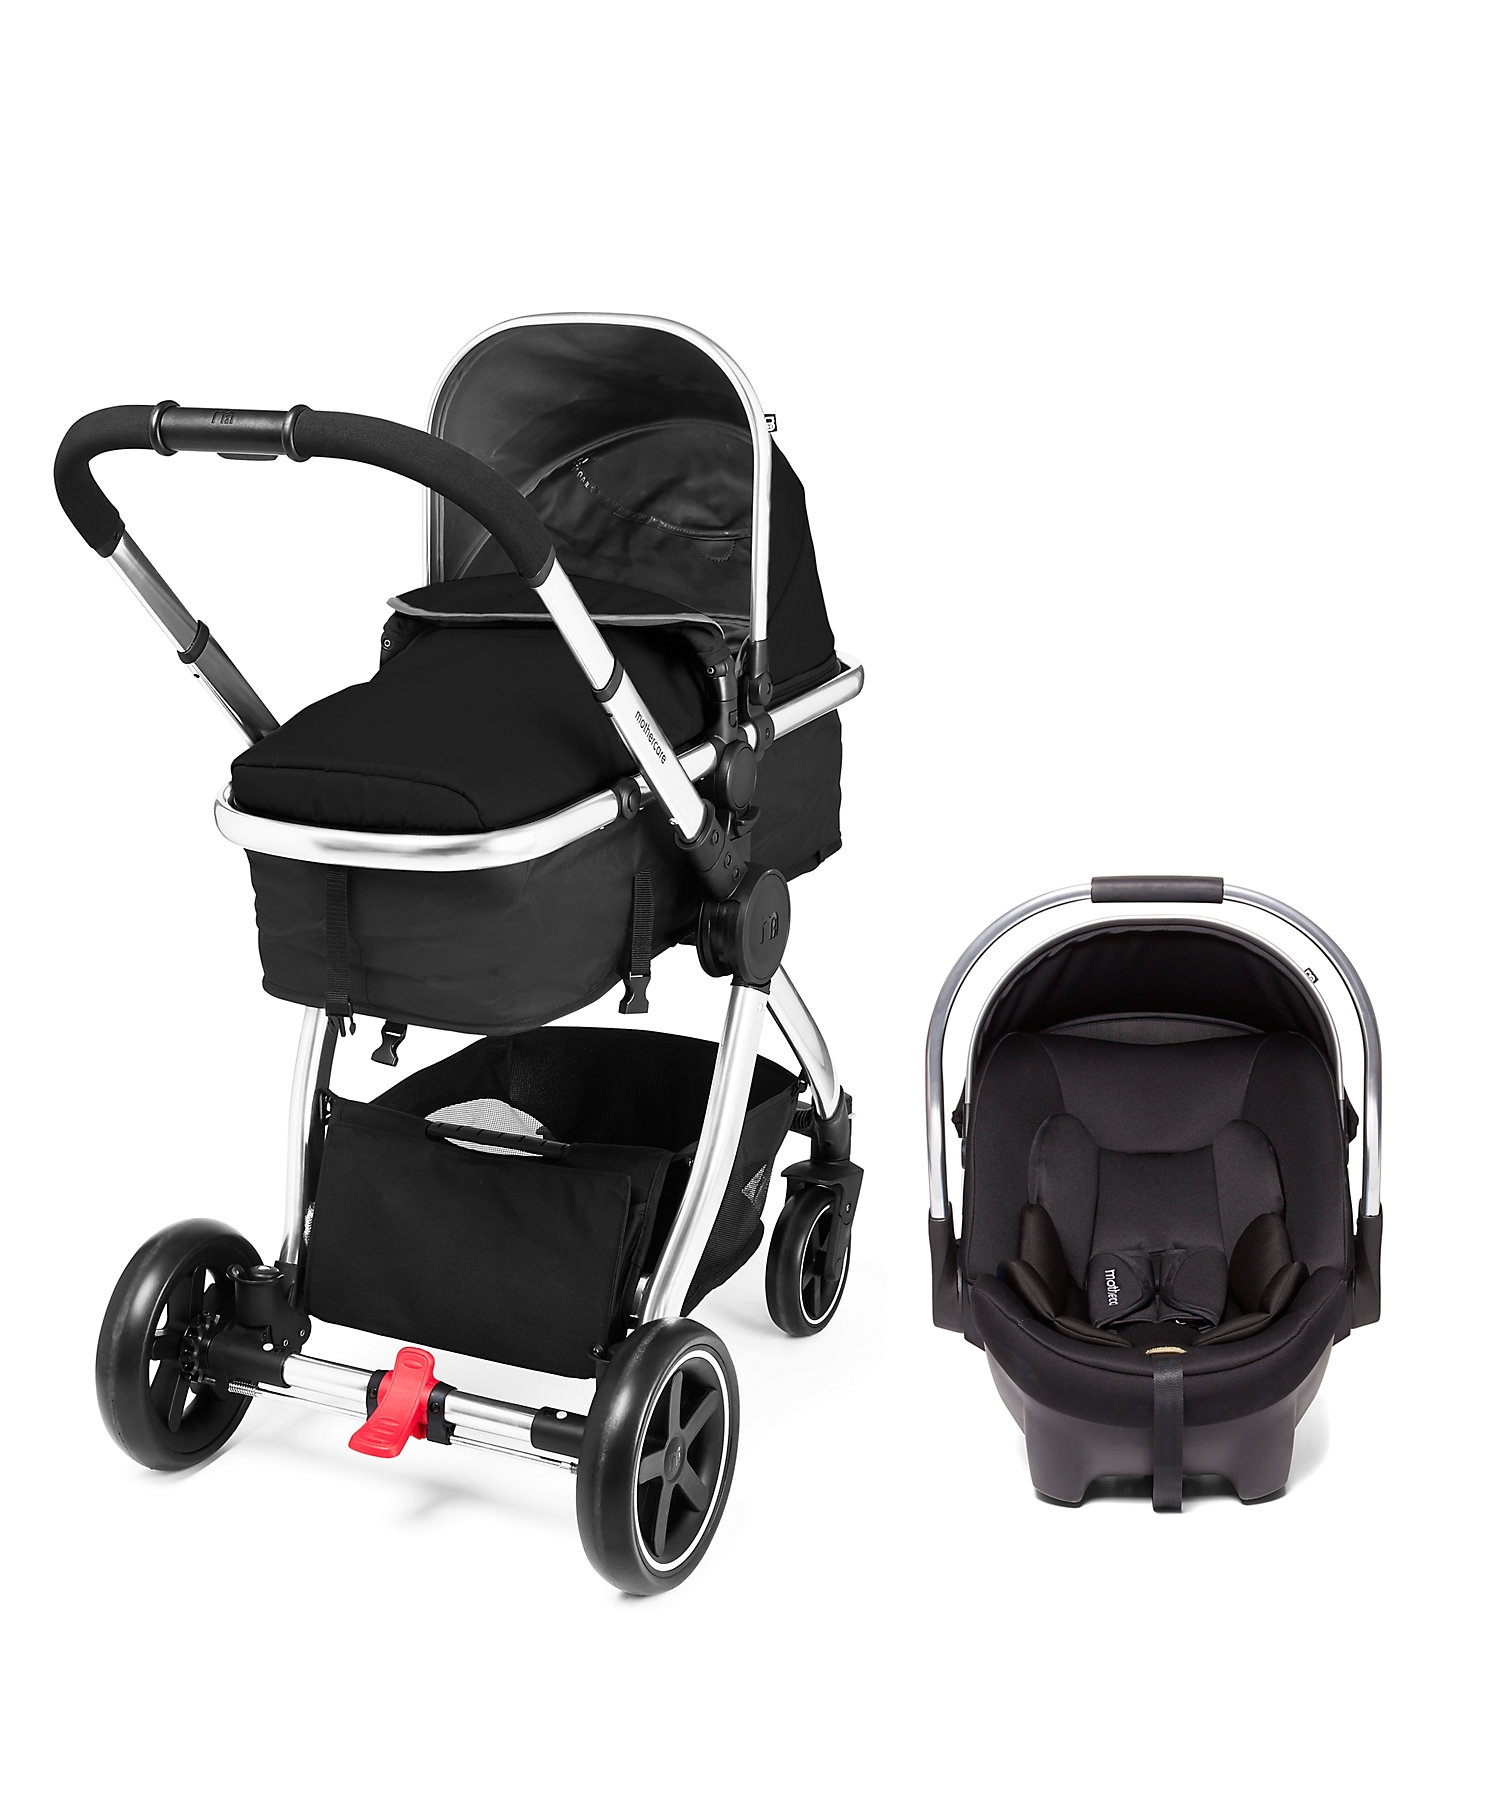 Mothercare | Mothercare Pc Journey Liner Travel System  Black